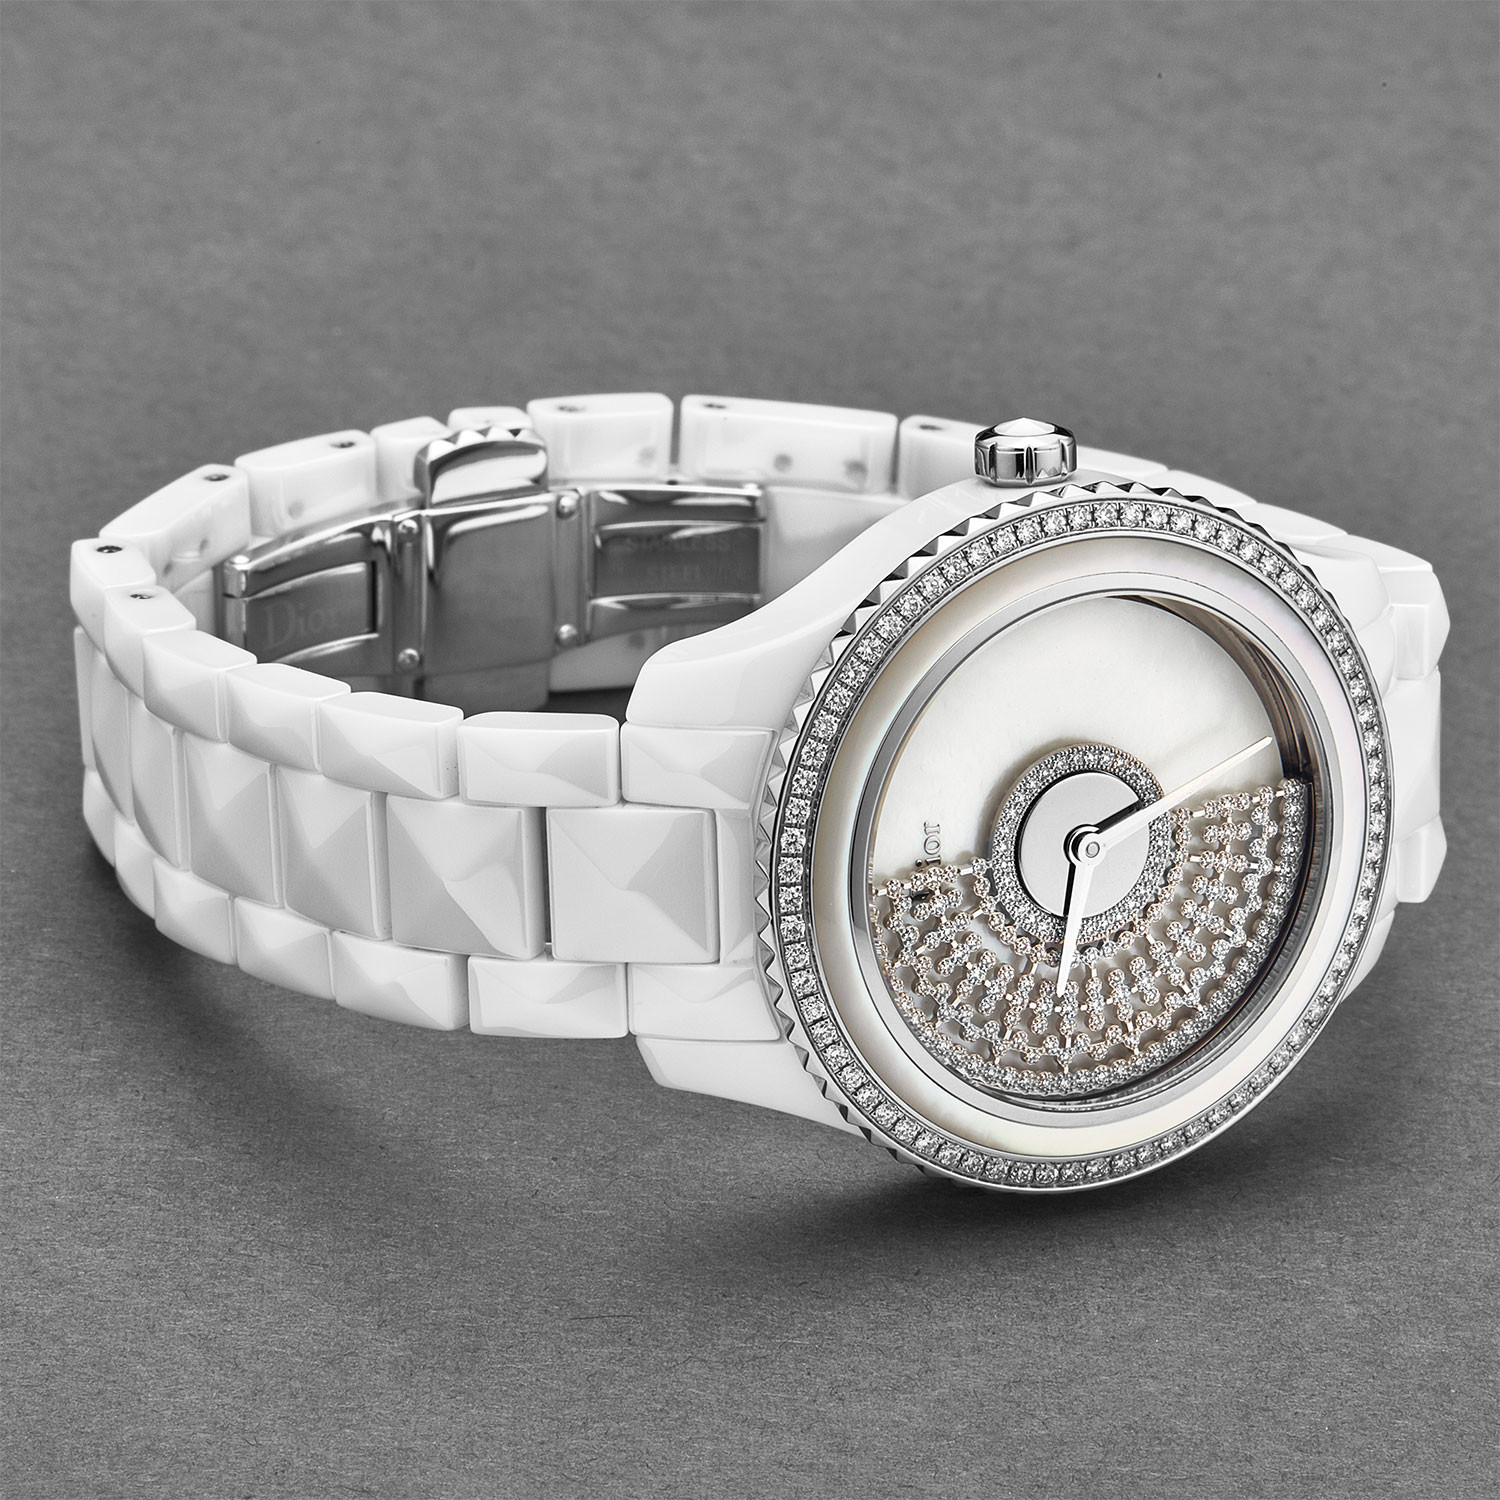 Dior Ladies White VIII Automatic // CD124BE4C001 - Swiss timepieces ...